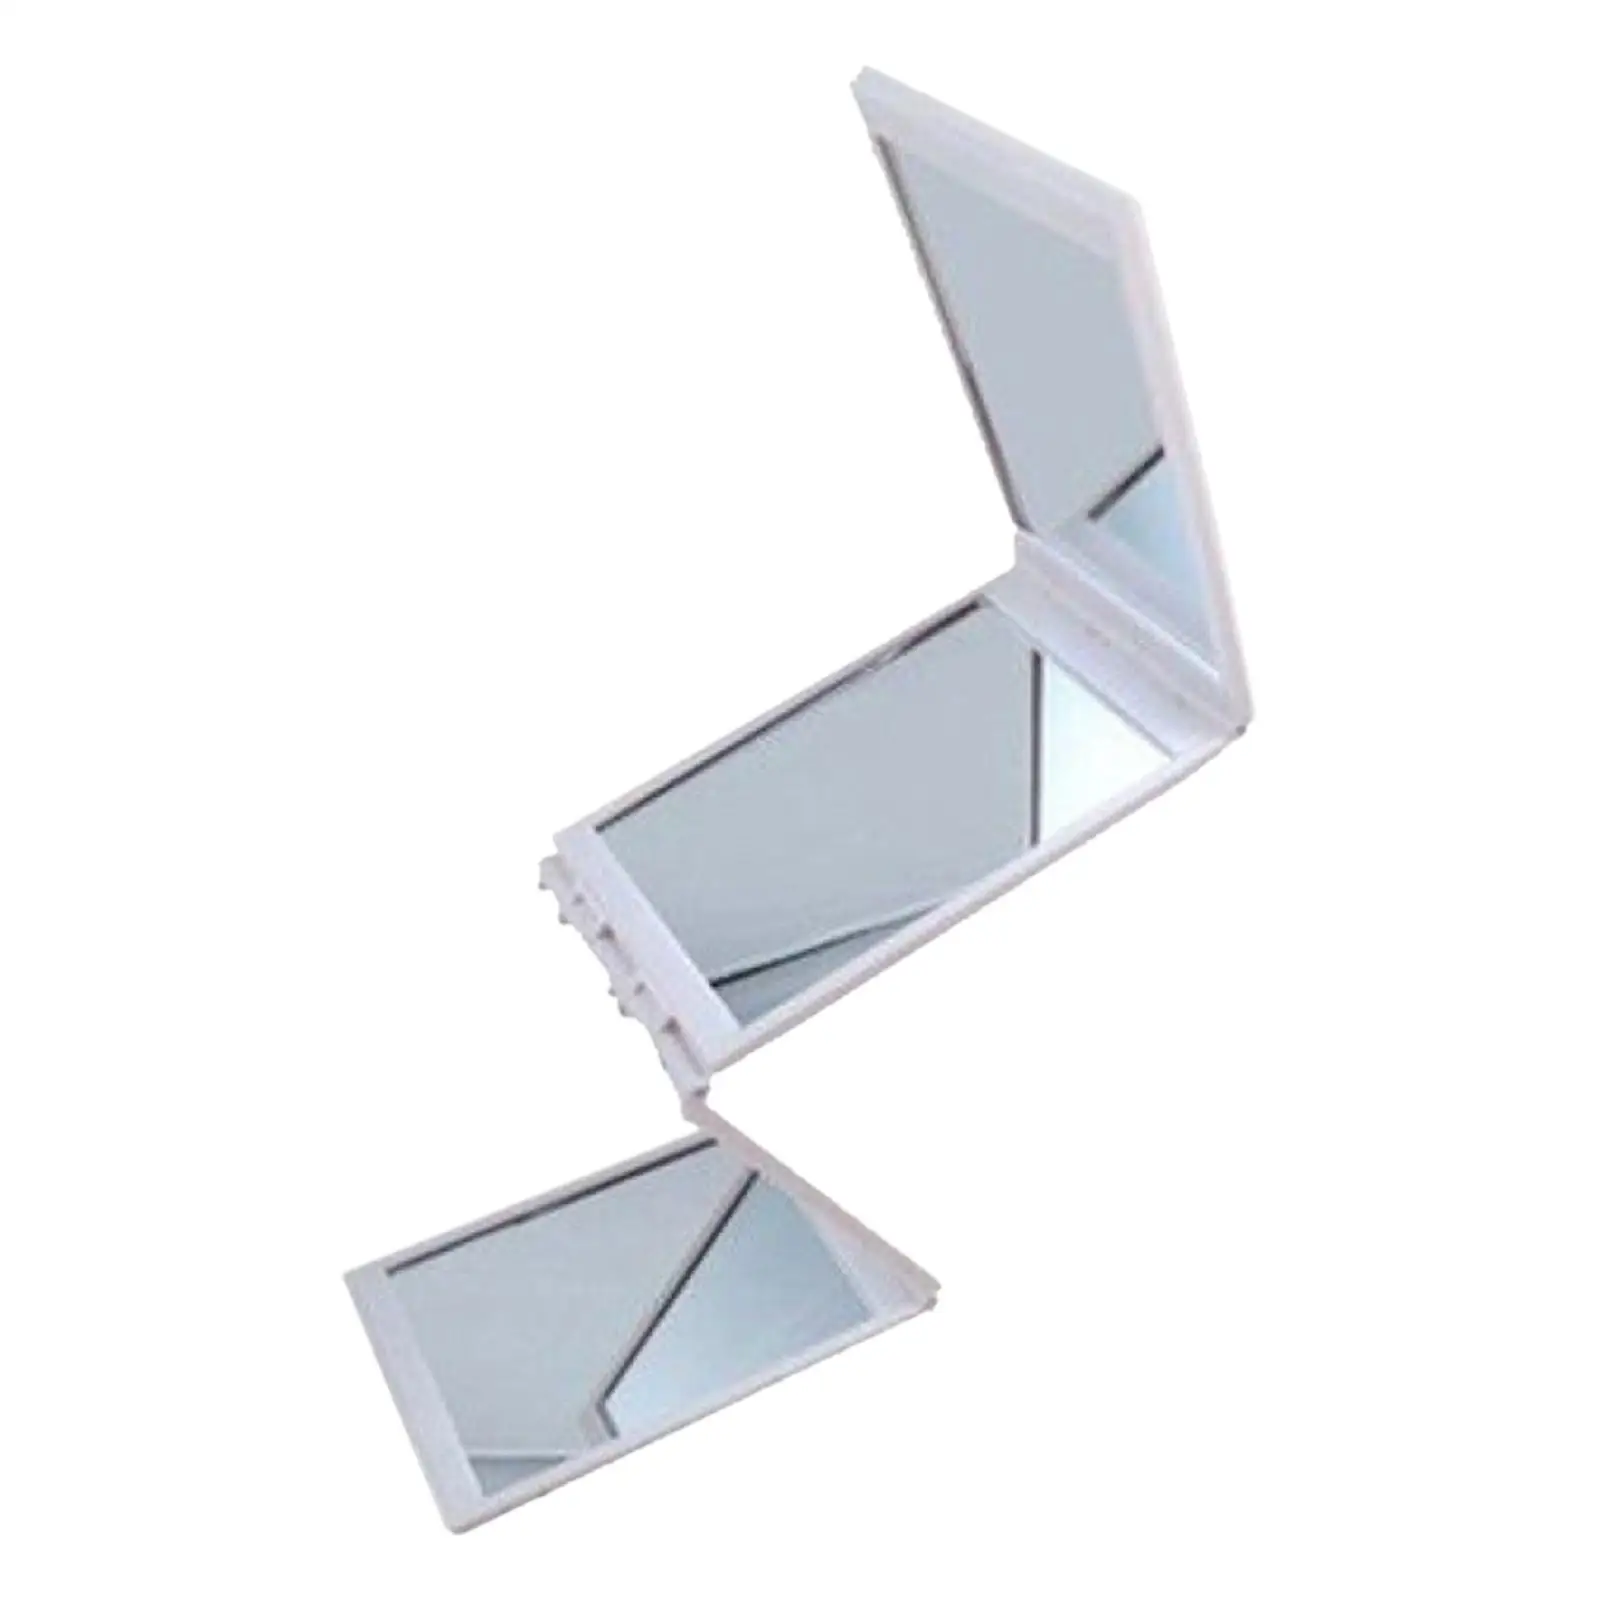 4 Sided Foldable Makeup Mirror Compact Mirror for Hair Styling Dorm SPA